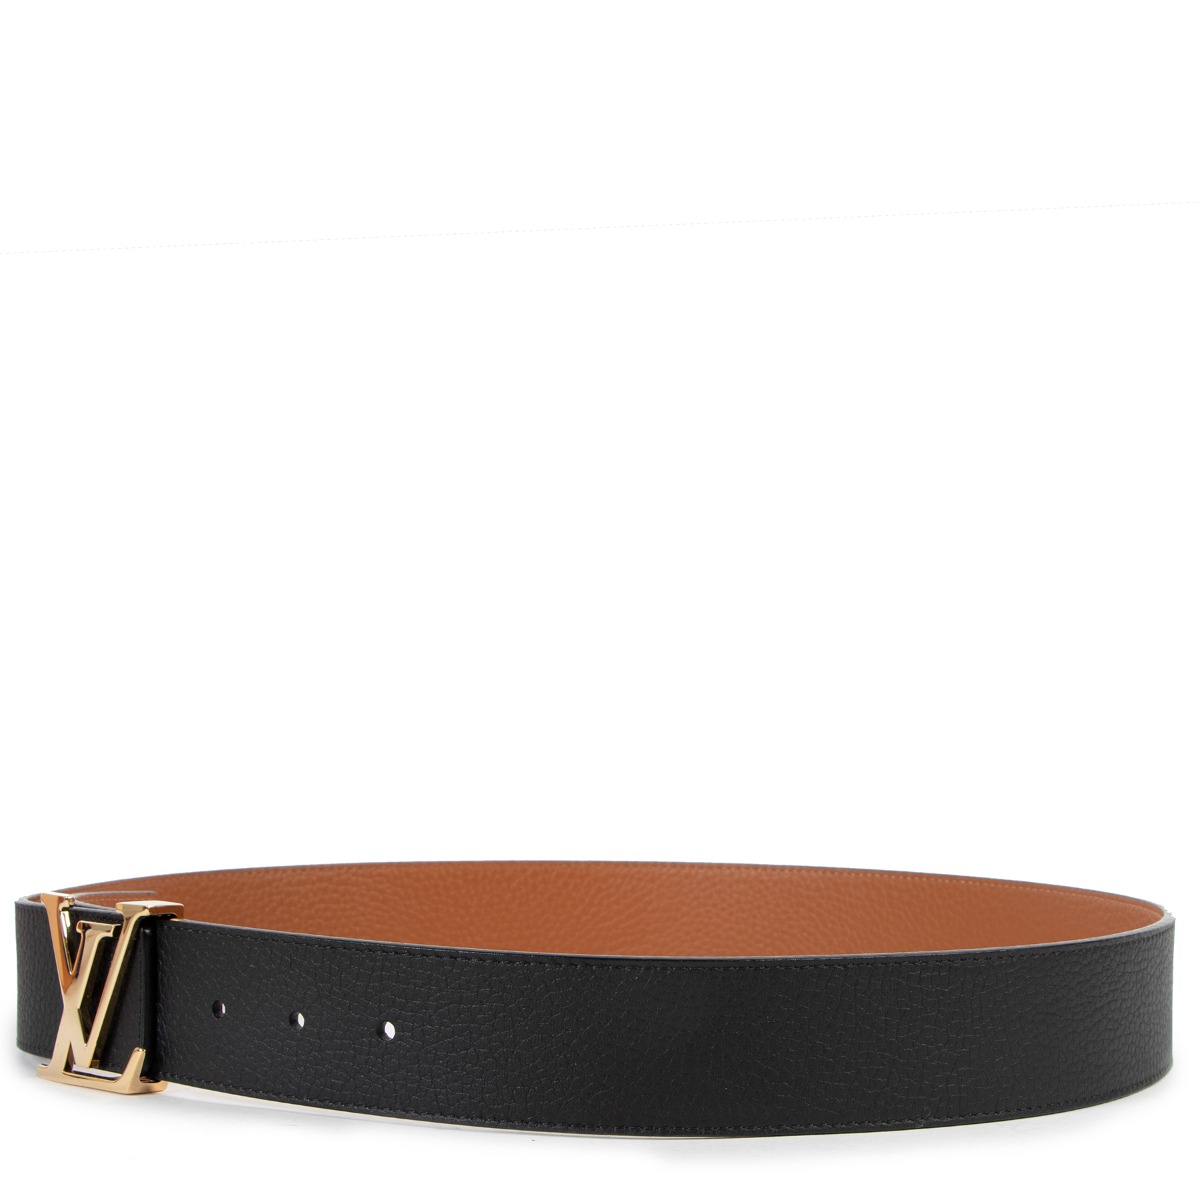 Initiales leather belt Louis Vuitton Black size L International in Leather  - 35677895